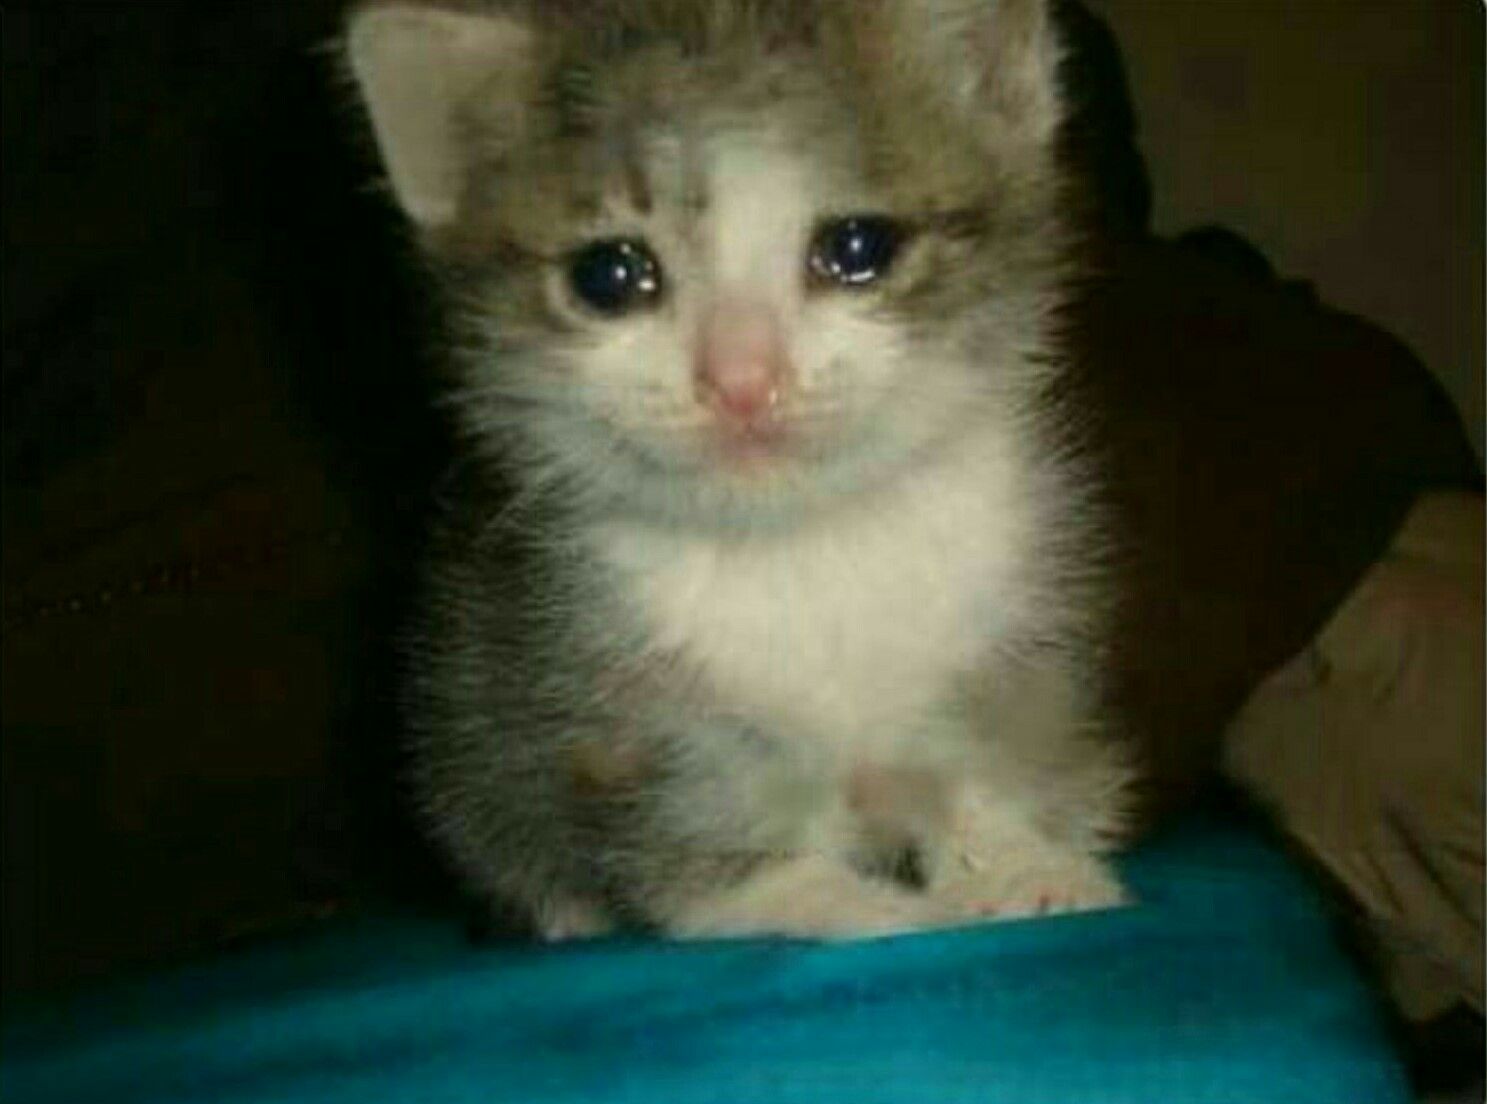 A picture of a crying cat